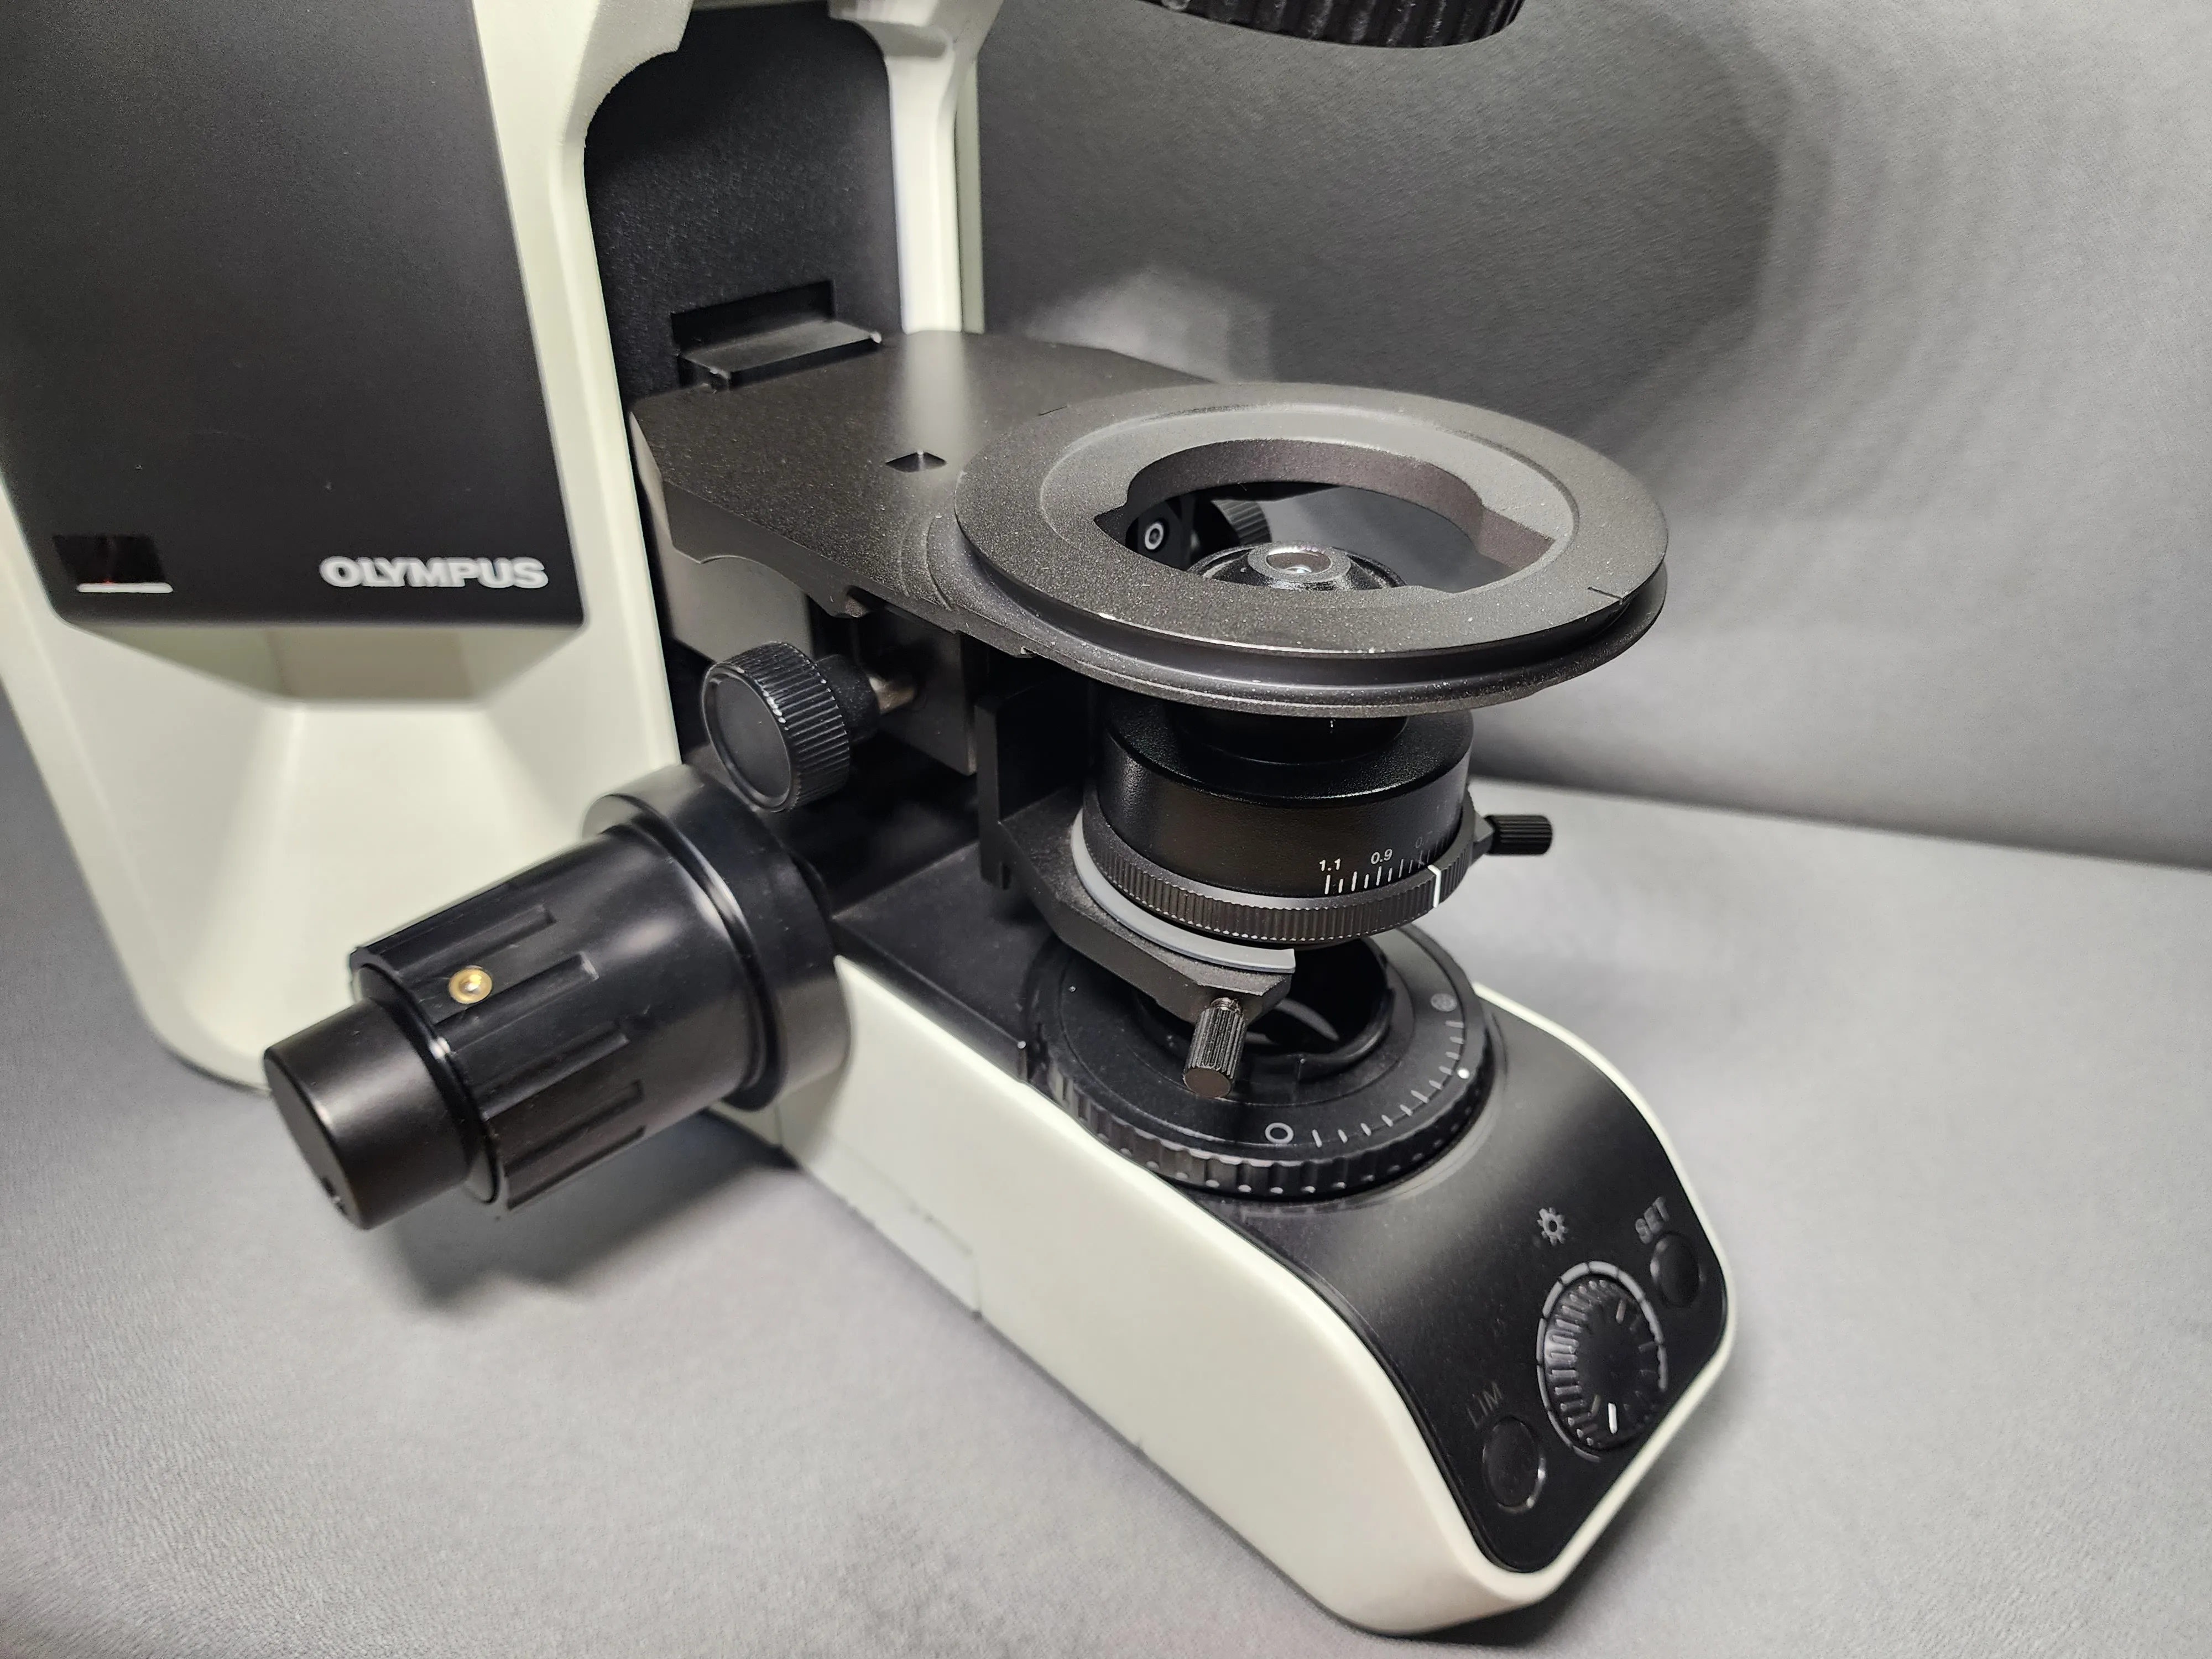 Olympus BX43F Clinical Microscope Used & Untested!